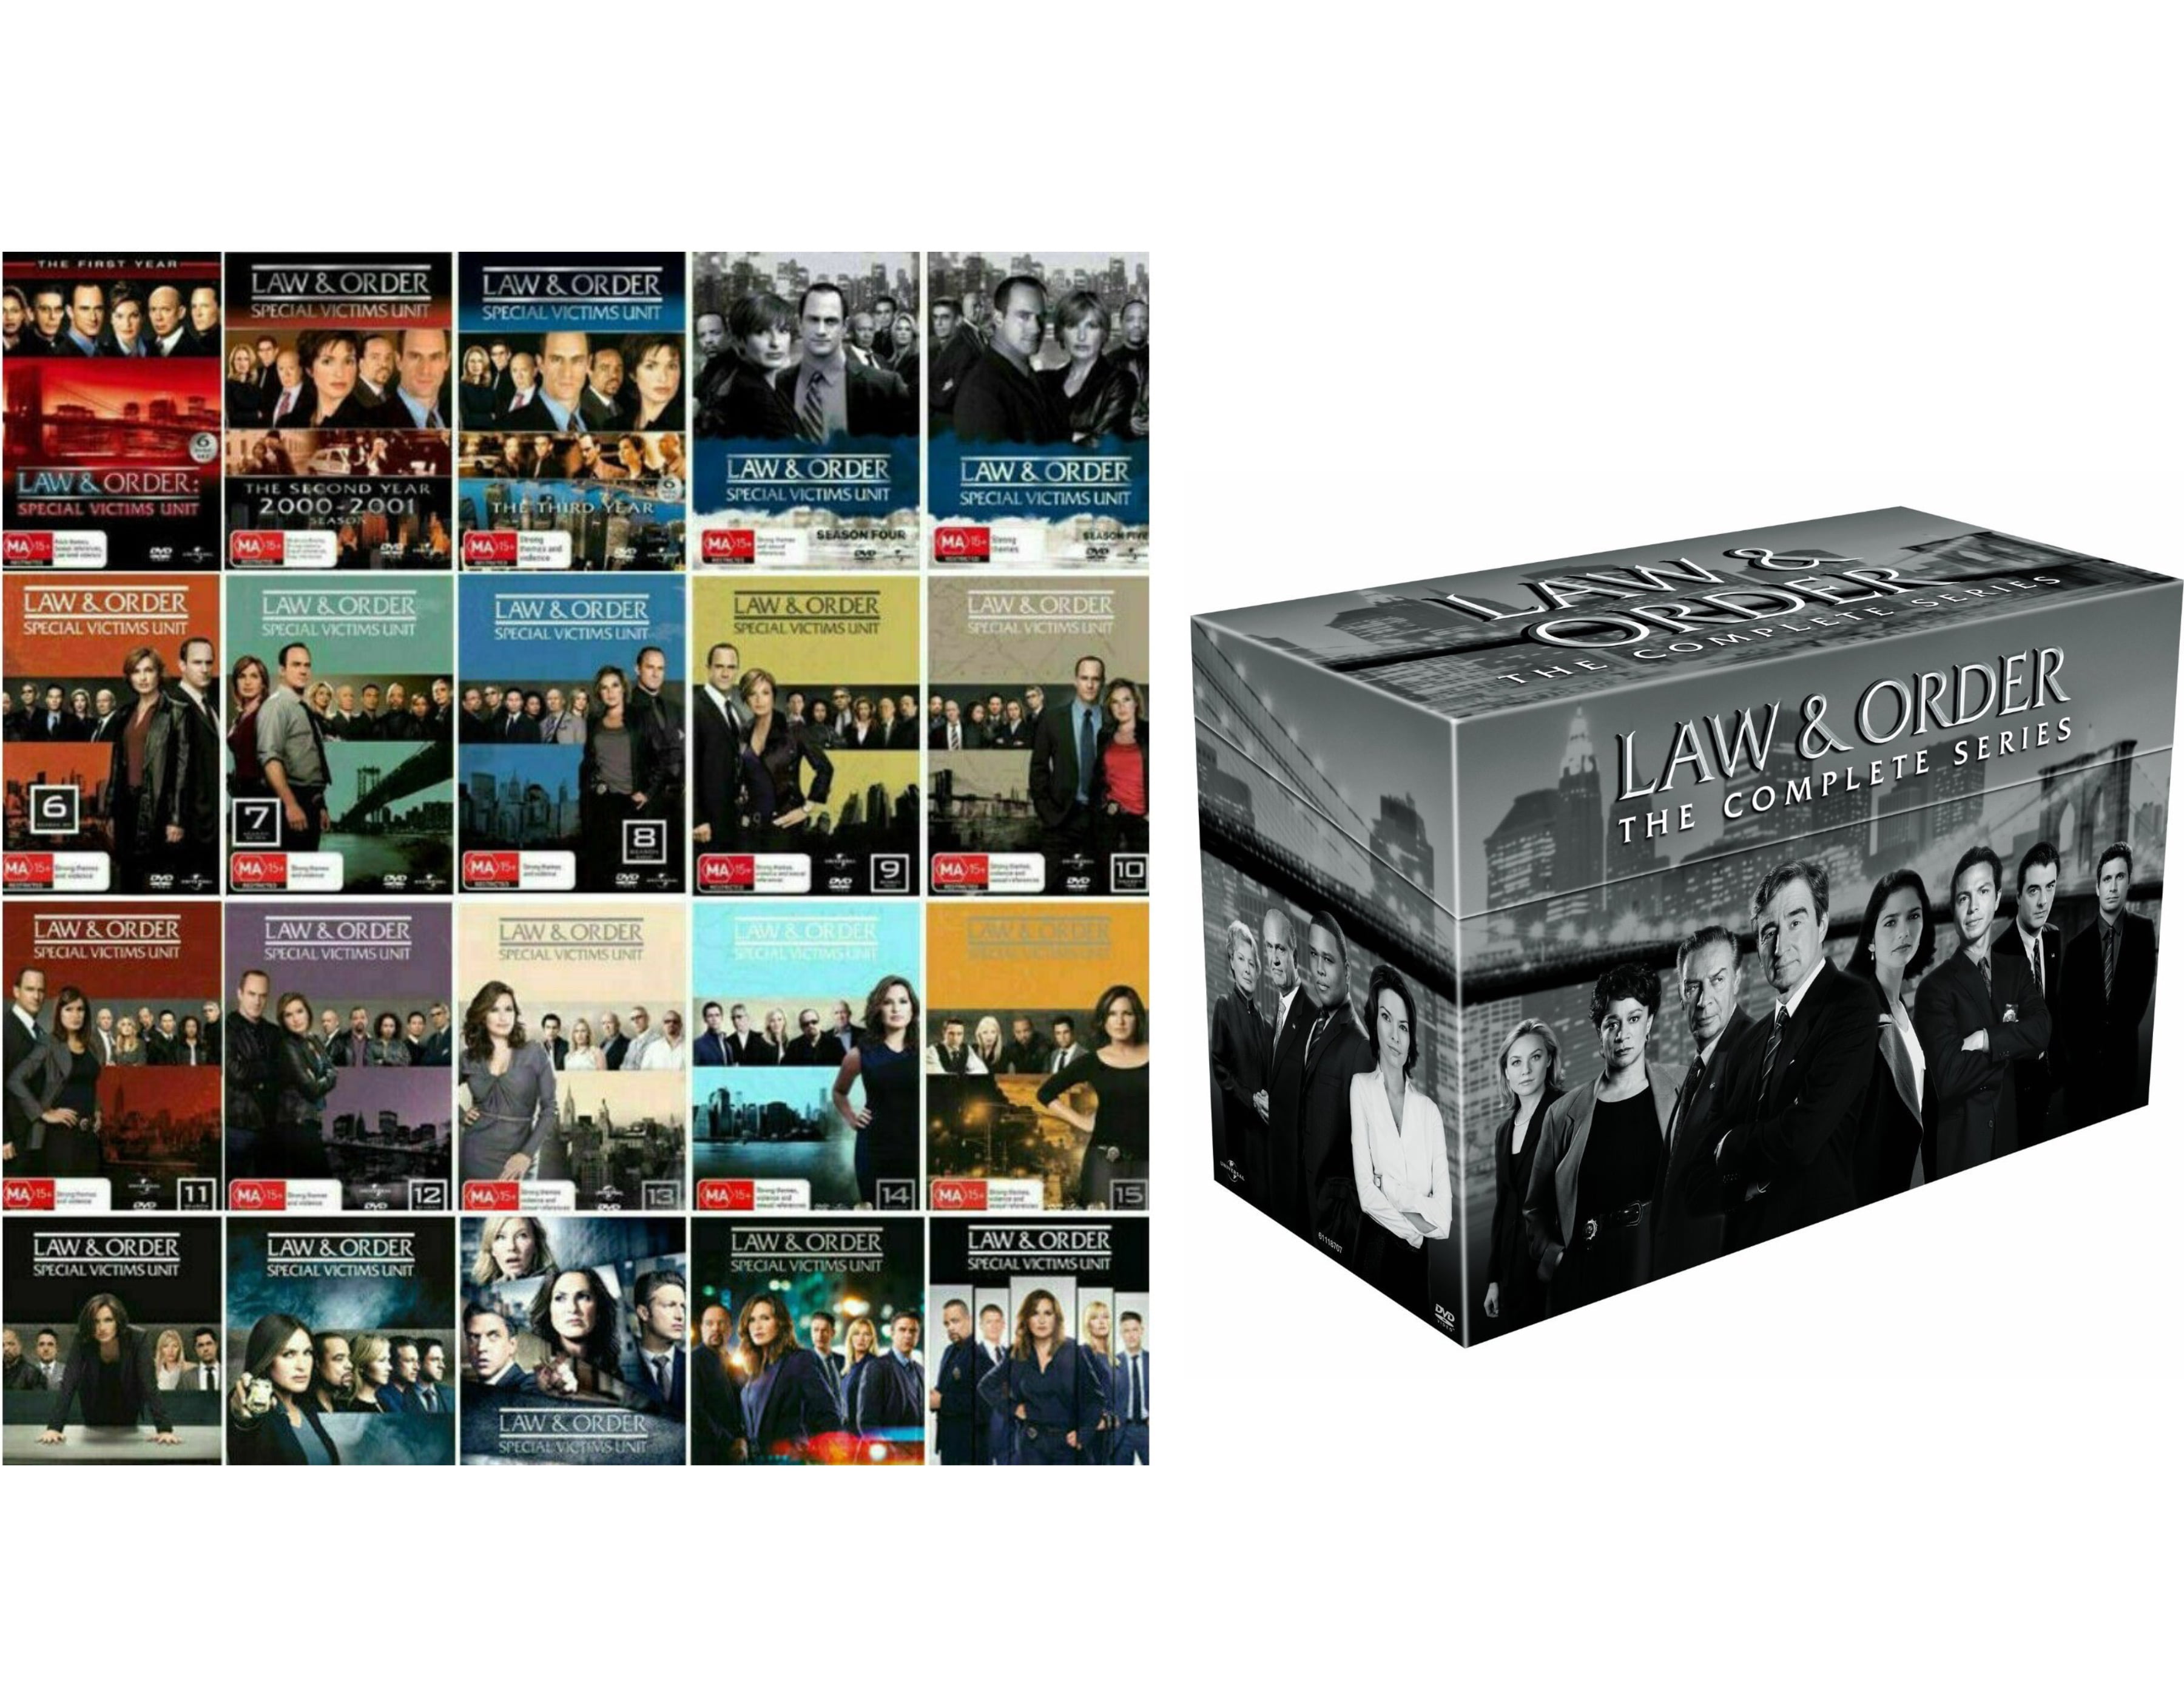 Law & Order Collection Sold Together - Law & Order: The Complete